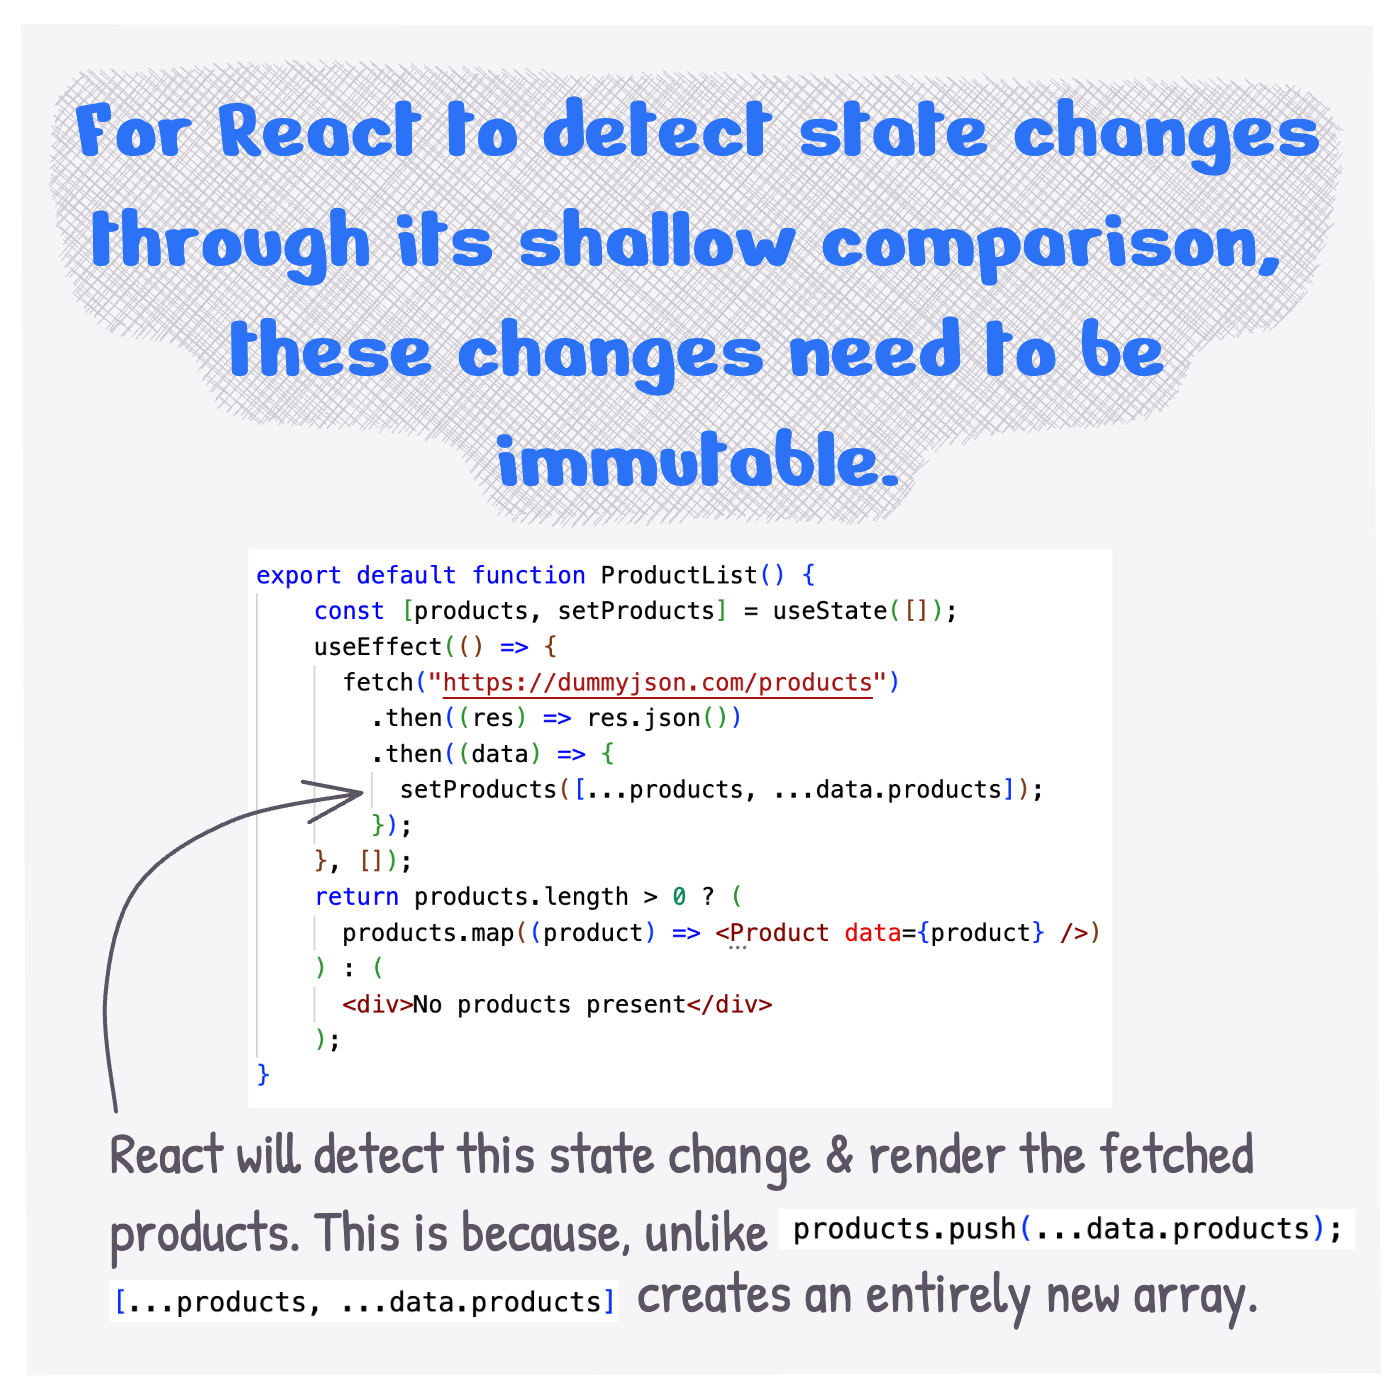 For React to detect state changes through its shallow comparison, these changes need to be immutable.